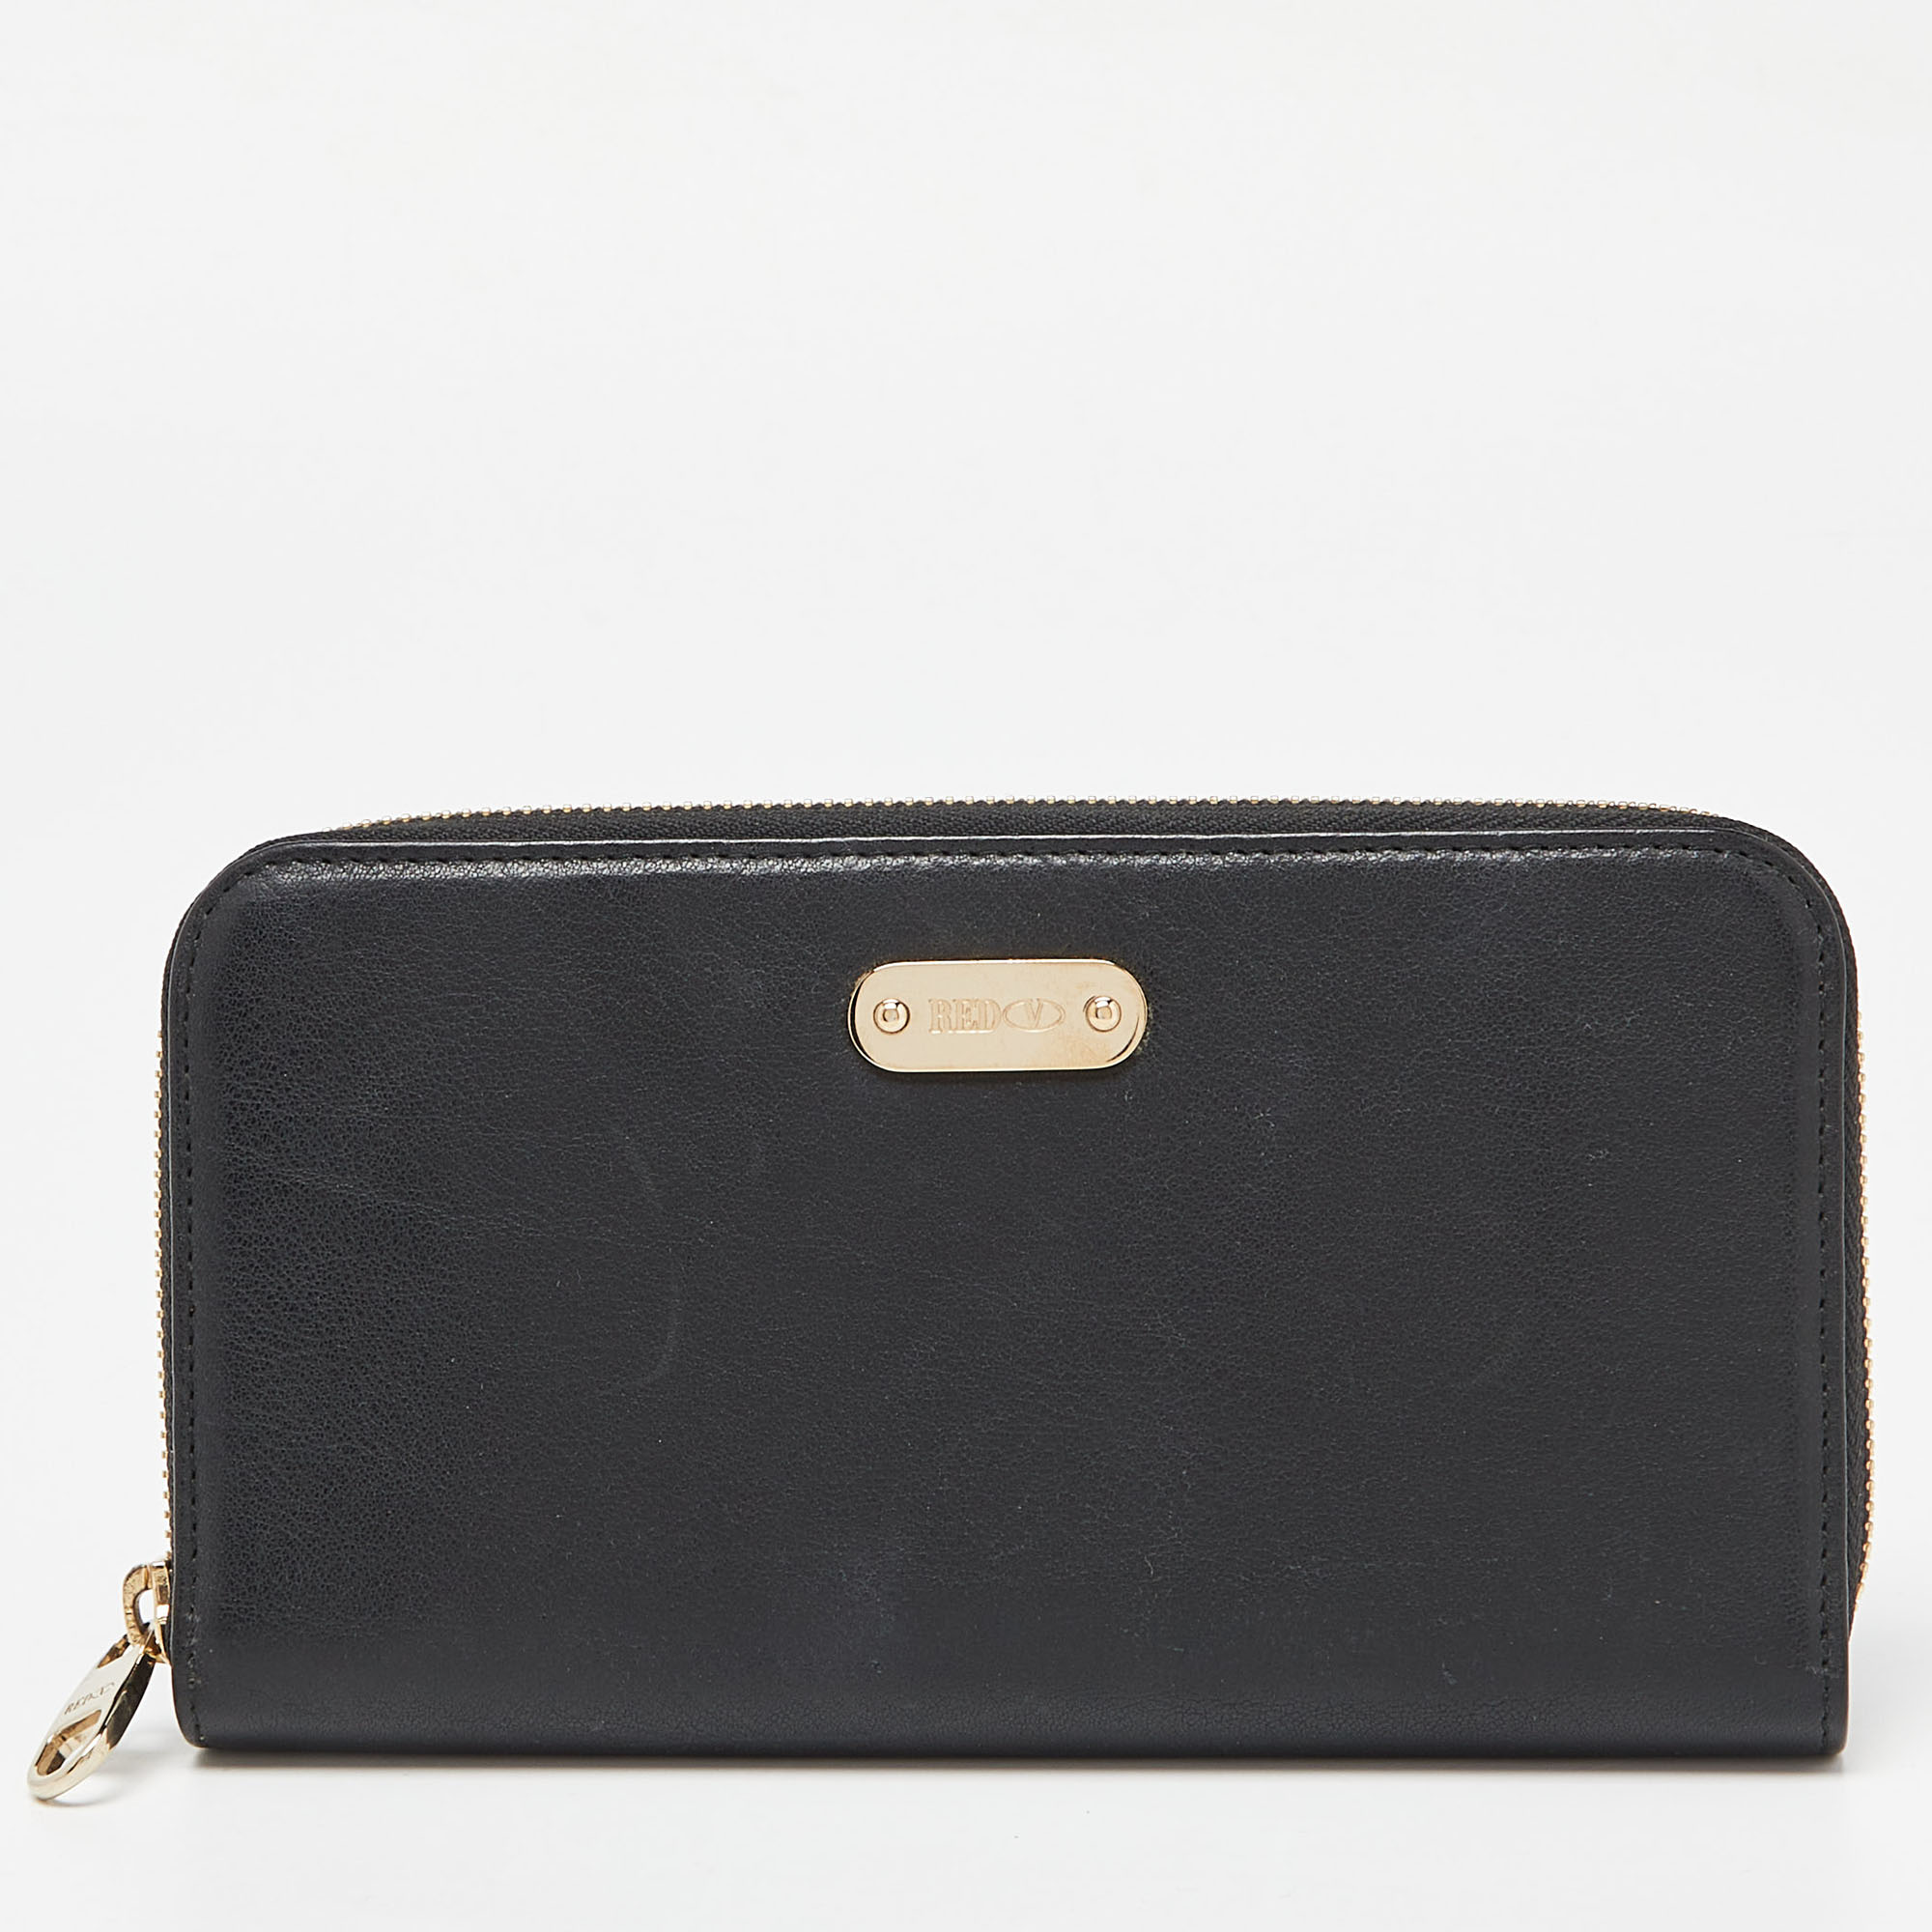 Pre-owned Red Valentino Black Leather Zip Around Wallet